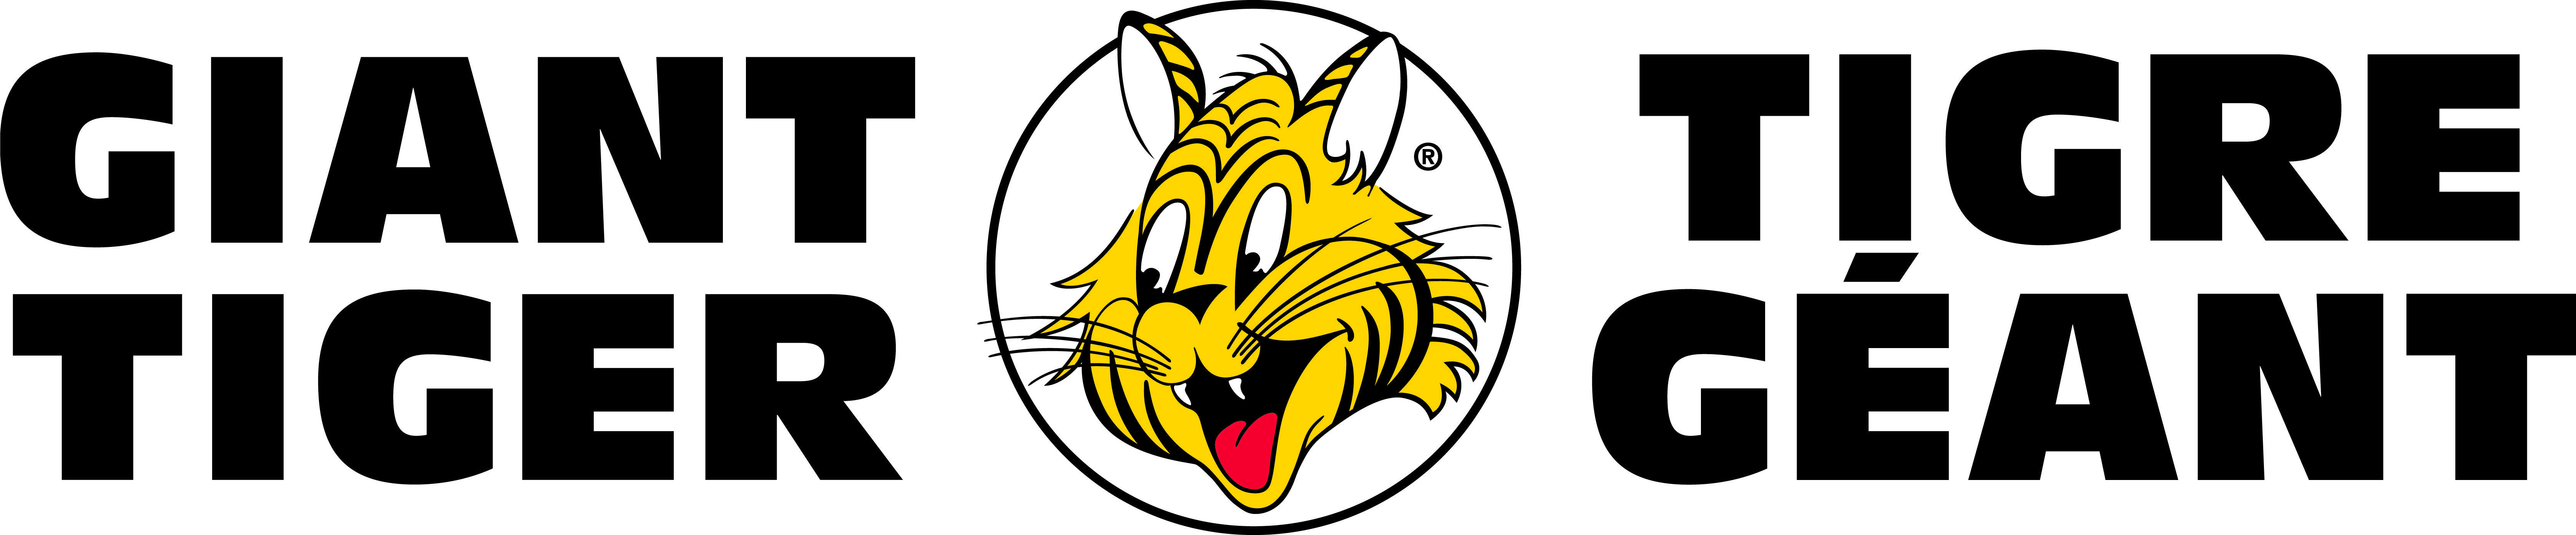 Yellow and Black Tiger Logo - Logos and Guidelines - Media Room - Discover GT | Giant Tiger